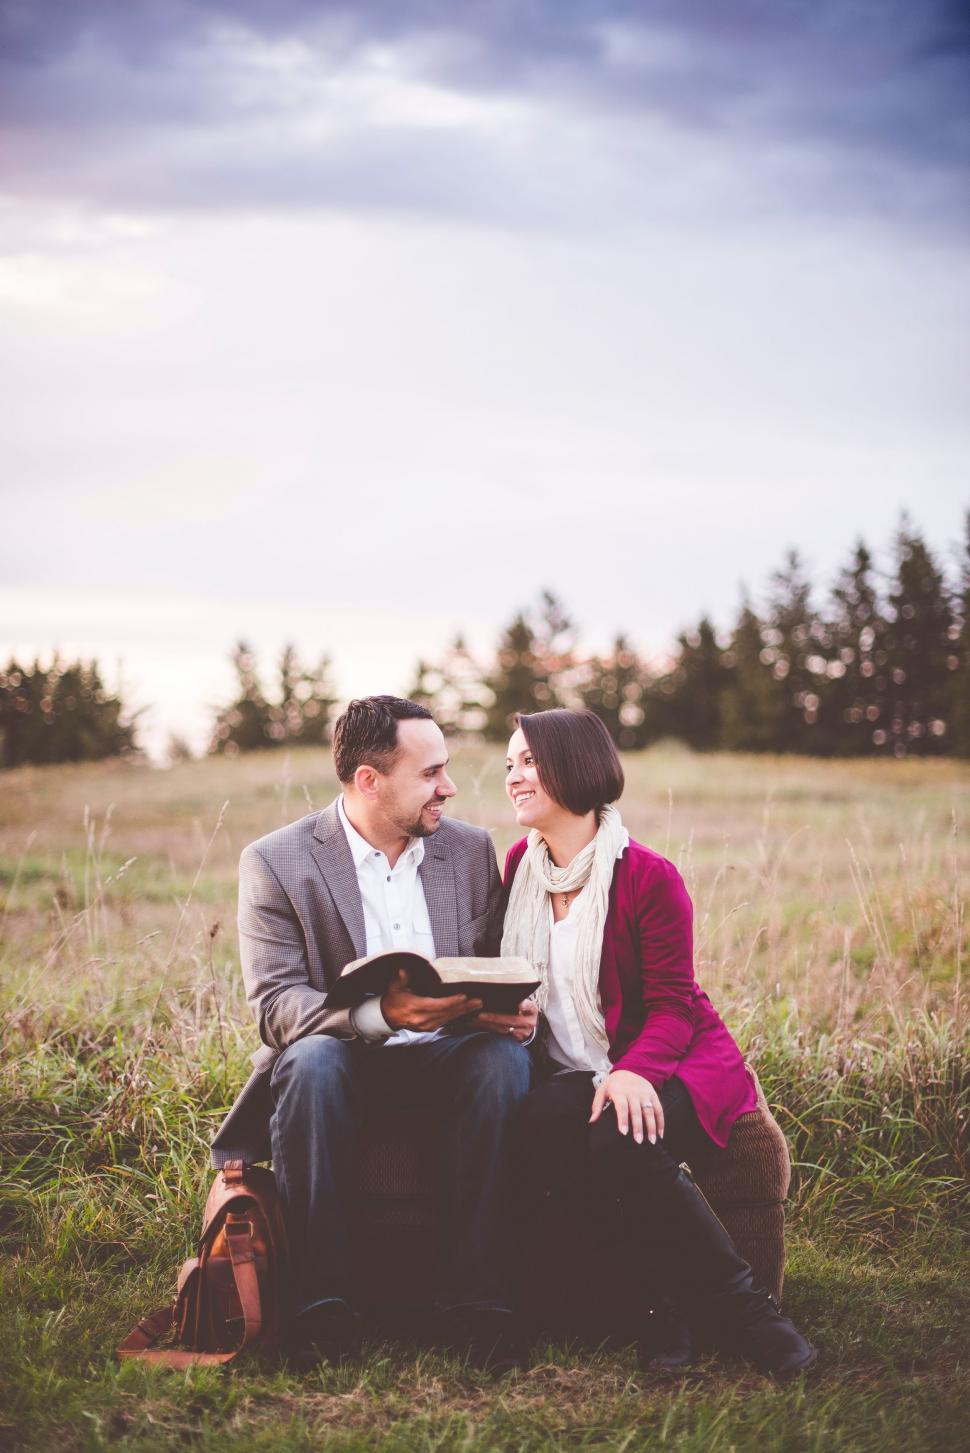 Free Image of Man and Woman Sitting in Field With Book 